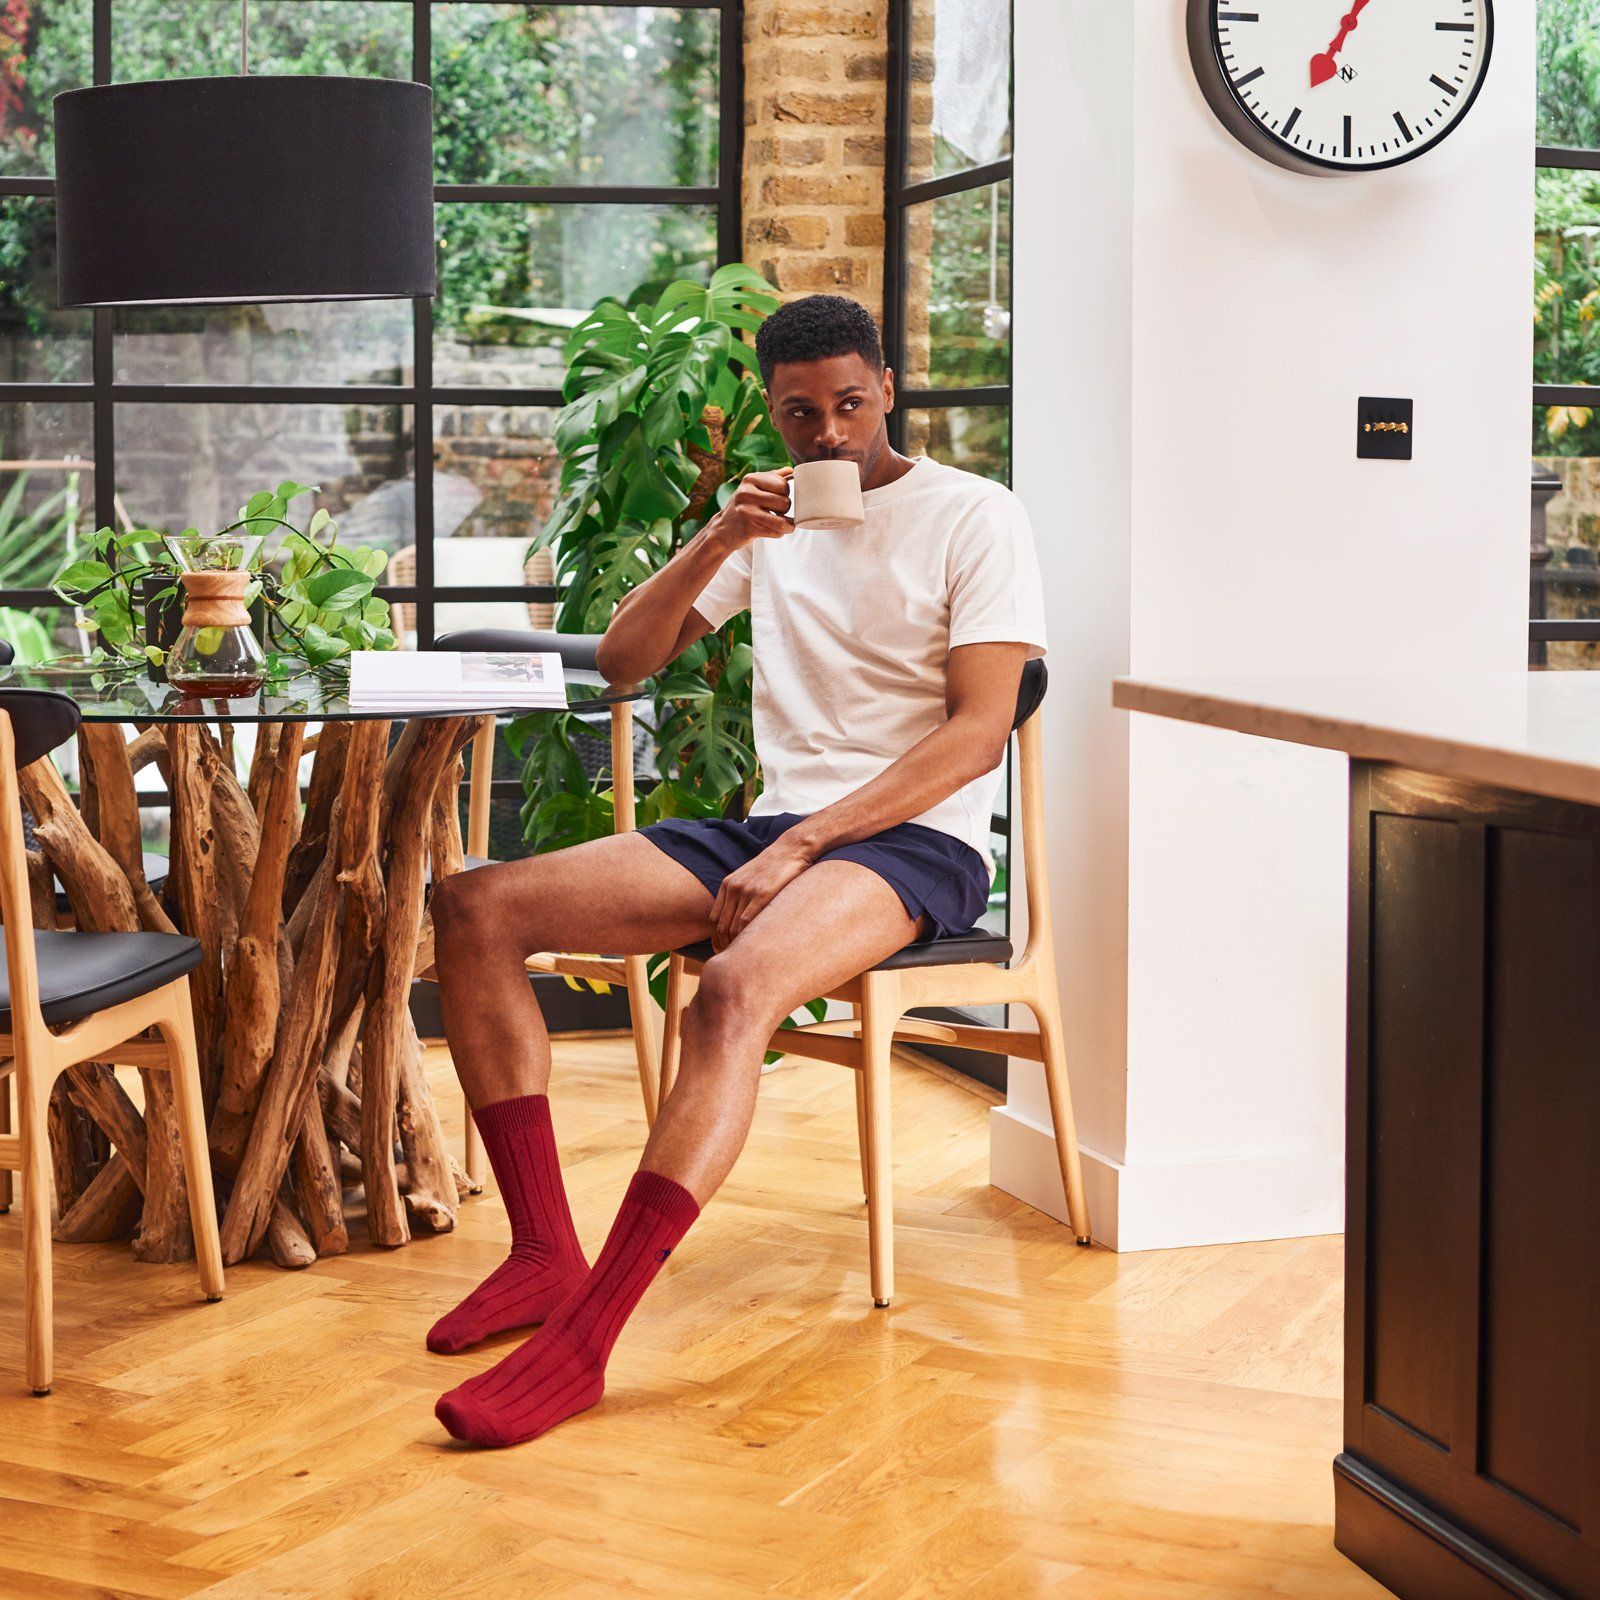 A man sitting on a chair in a kitchen holding a cup of coffee, wearing red
cashmere socks from the London Sock Company.